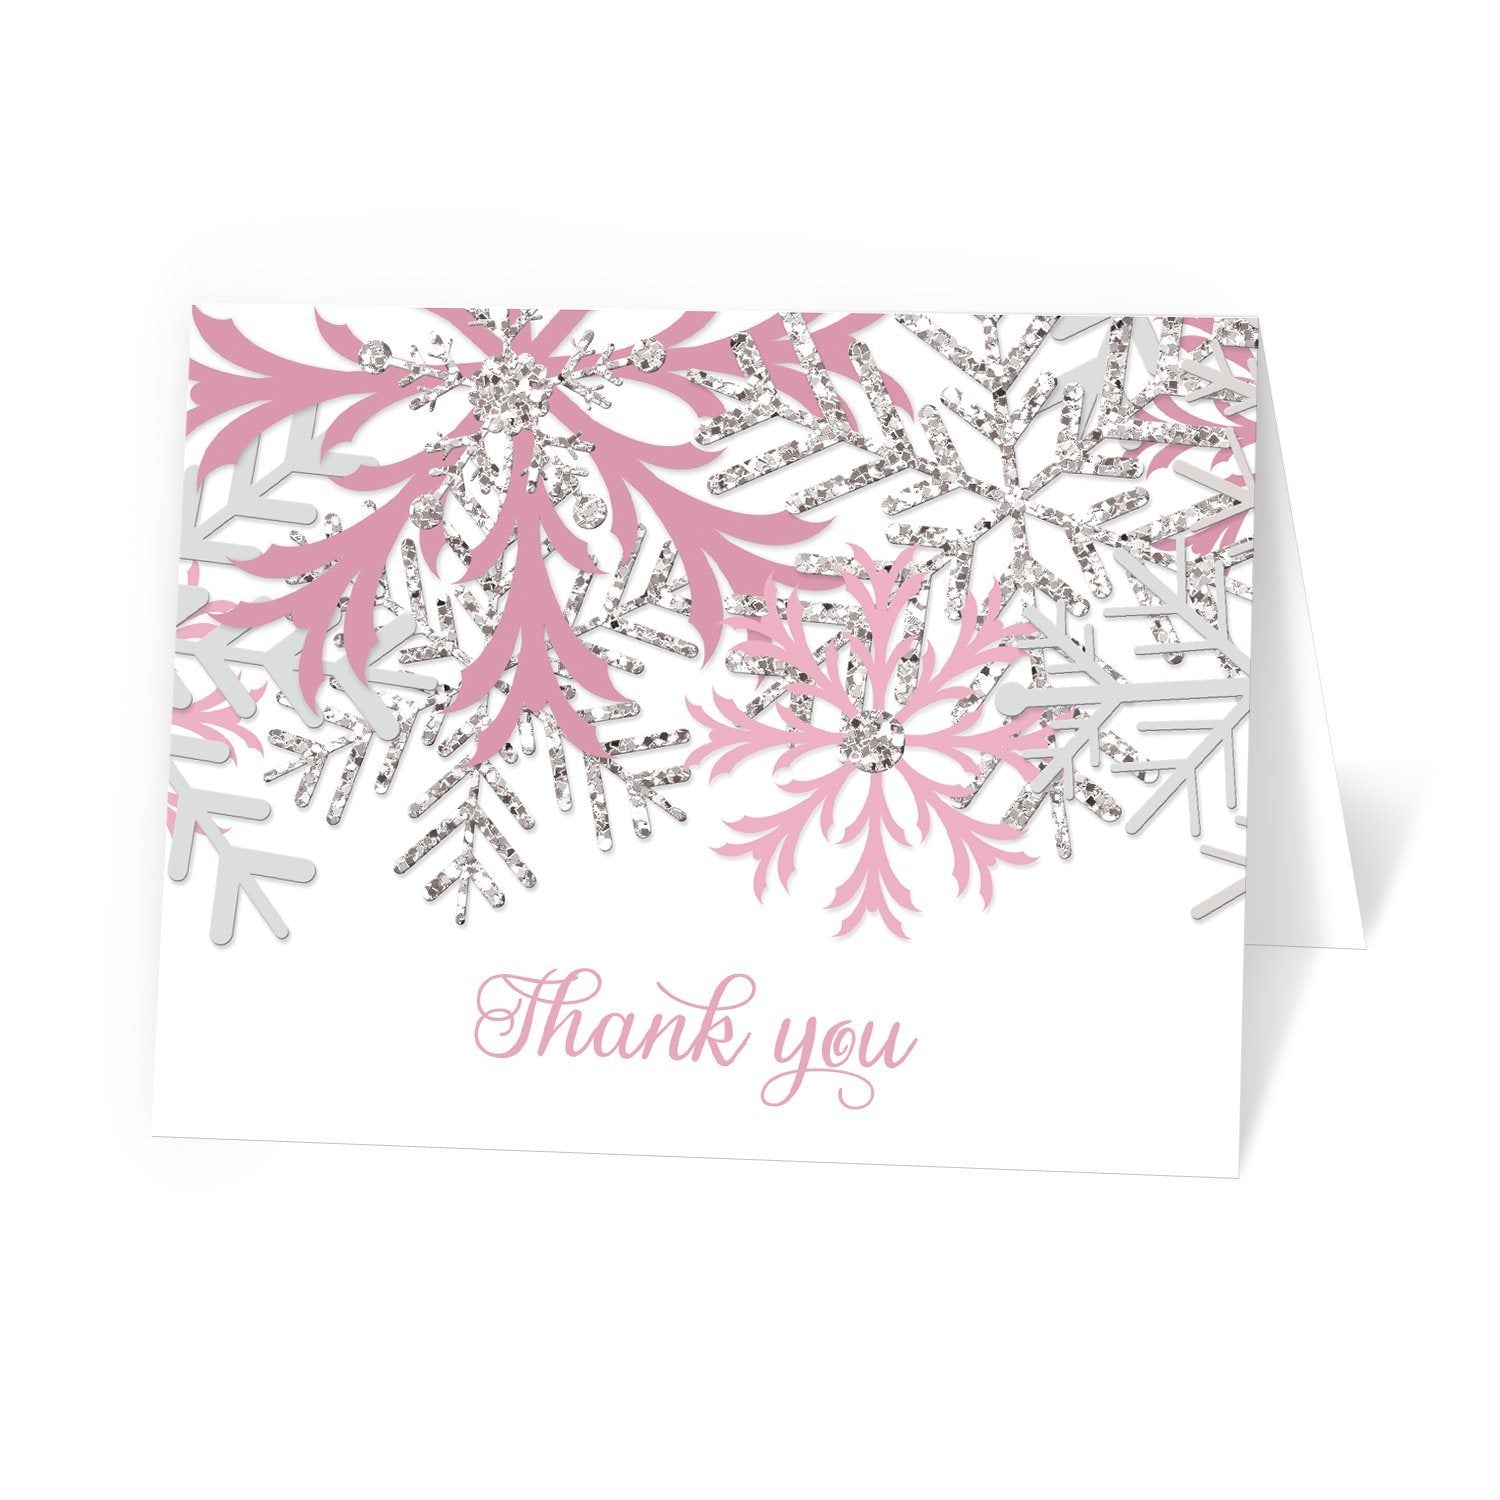 Winter Pink Silver Snowflake Thank You Cards at Artistically Invited. Winter pink silver snowflake thank you cards with pink and silver-colored glitter-illustrated snowflakes over a white background and 'Thank you' printed in a whimsical pink script font. 